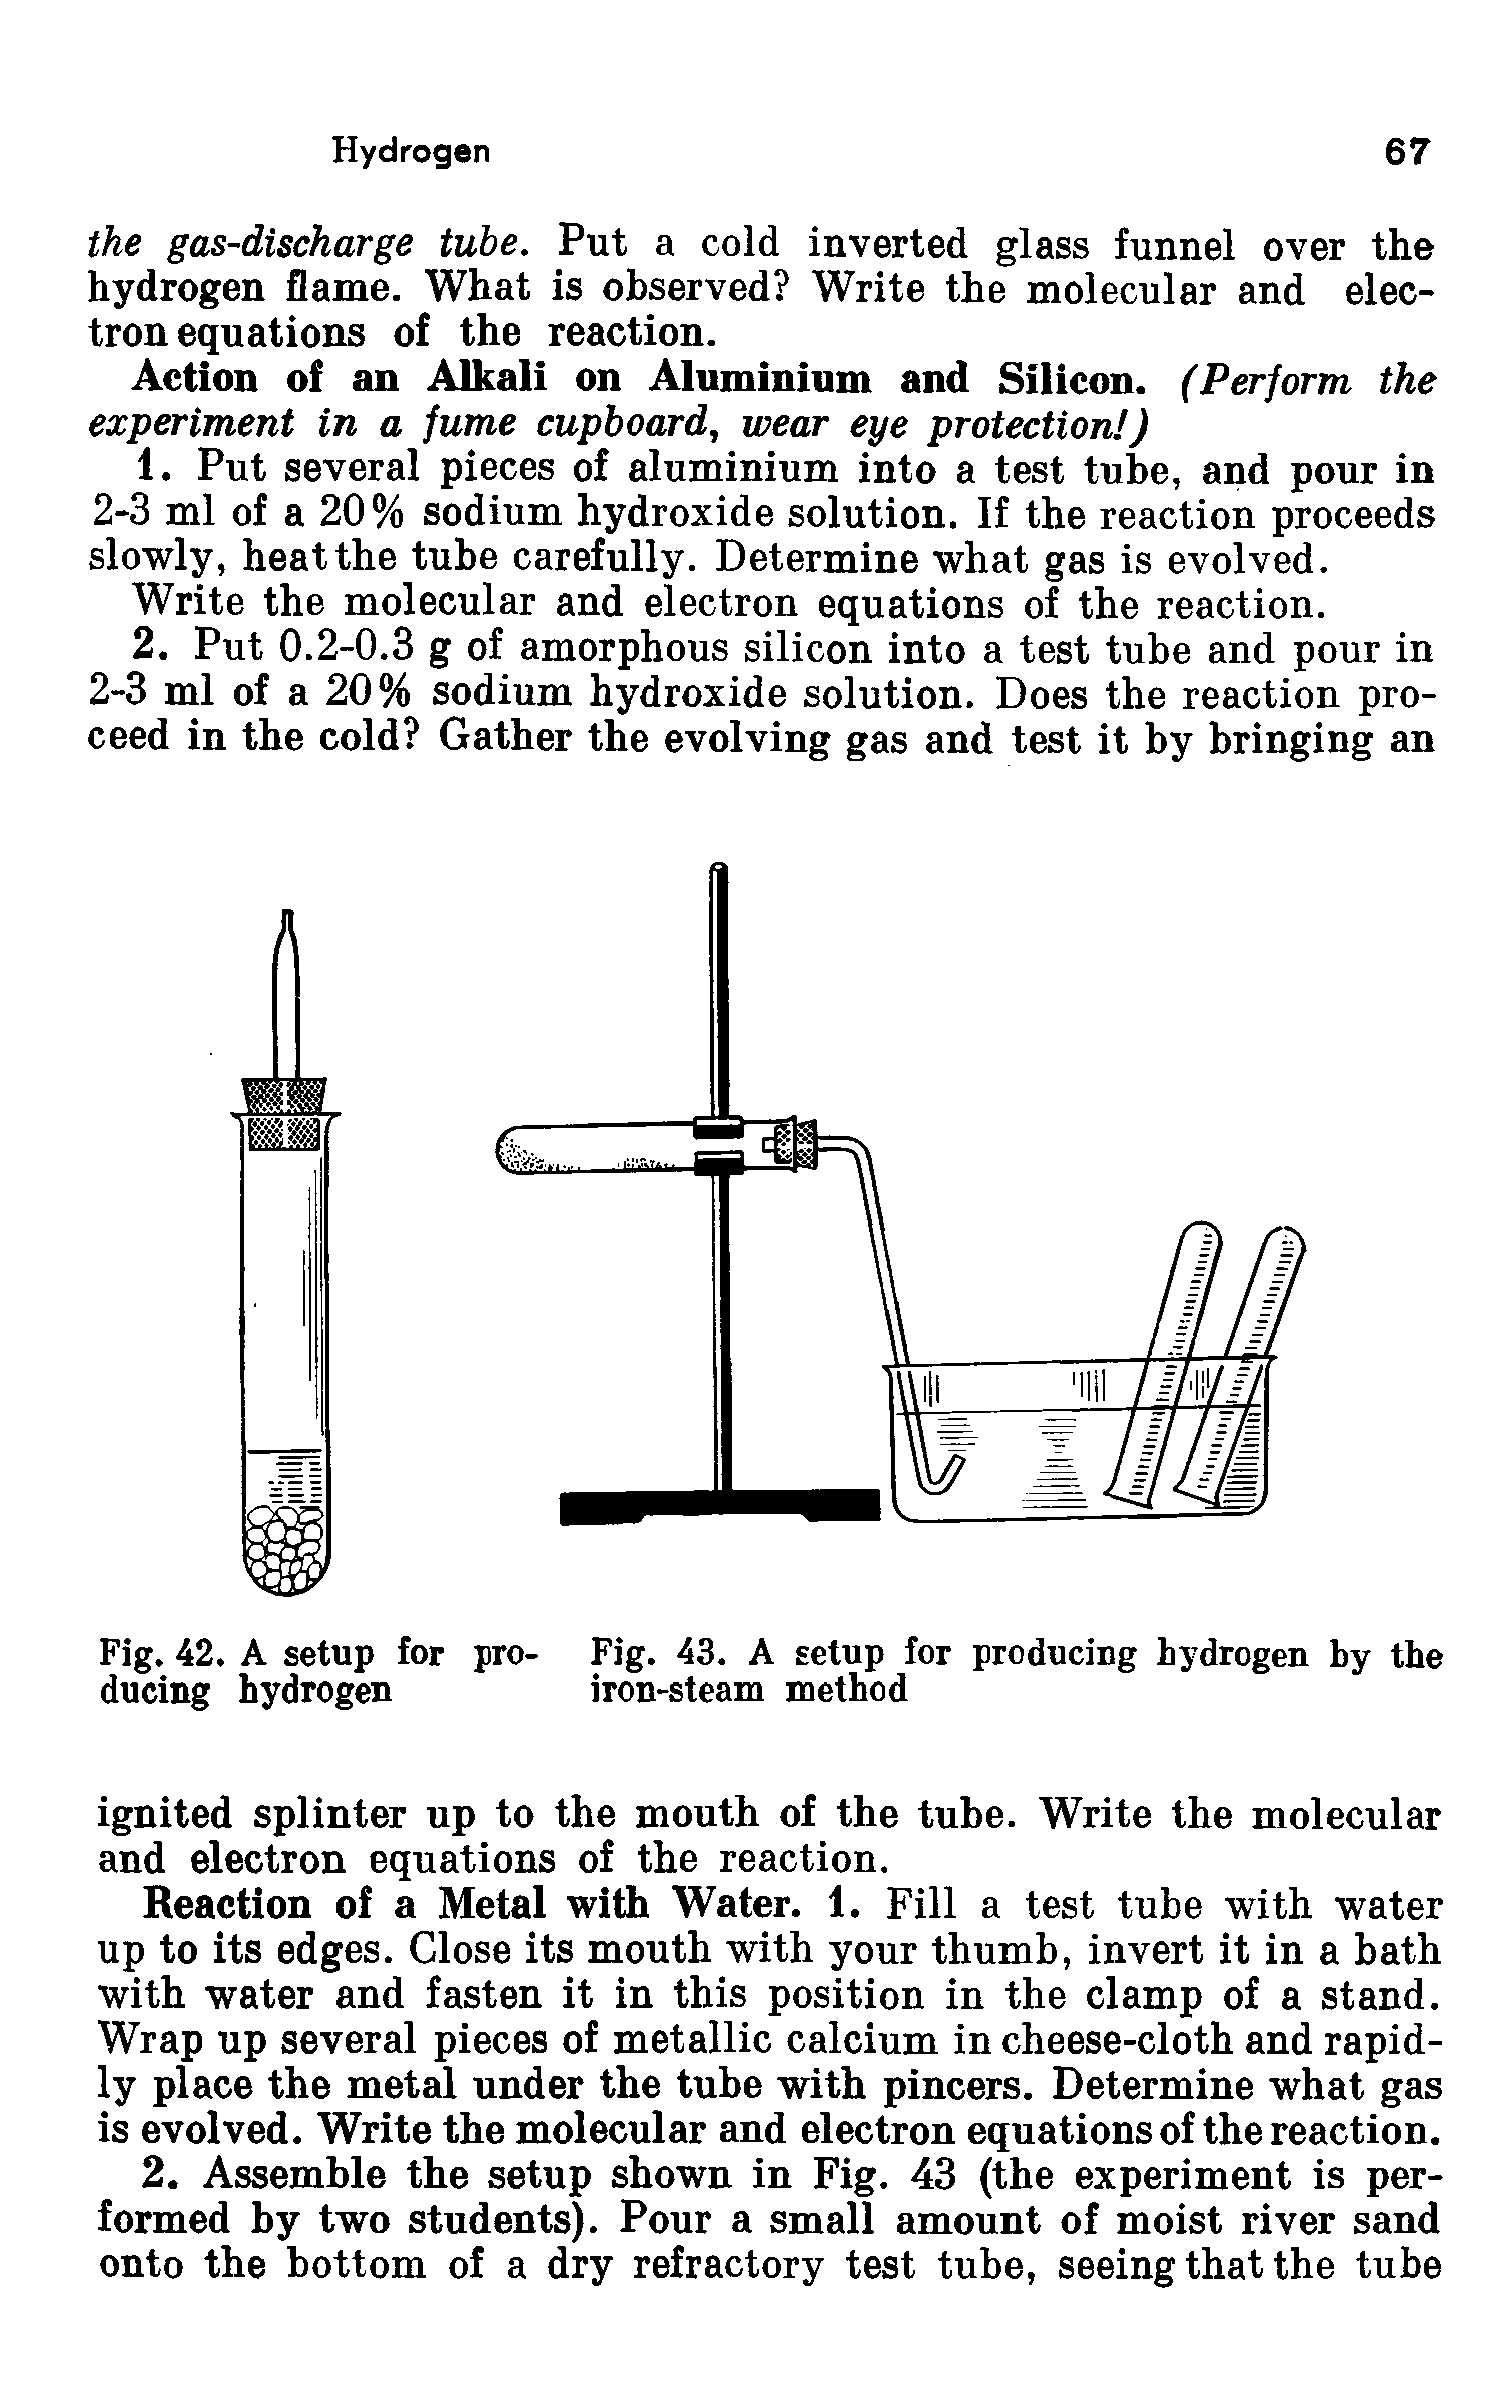 Fig. 43. A setup for producing hydrogen by the iron-steam method...